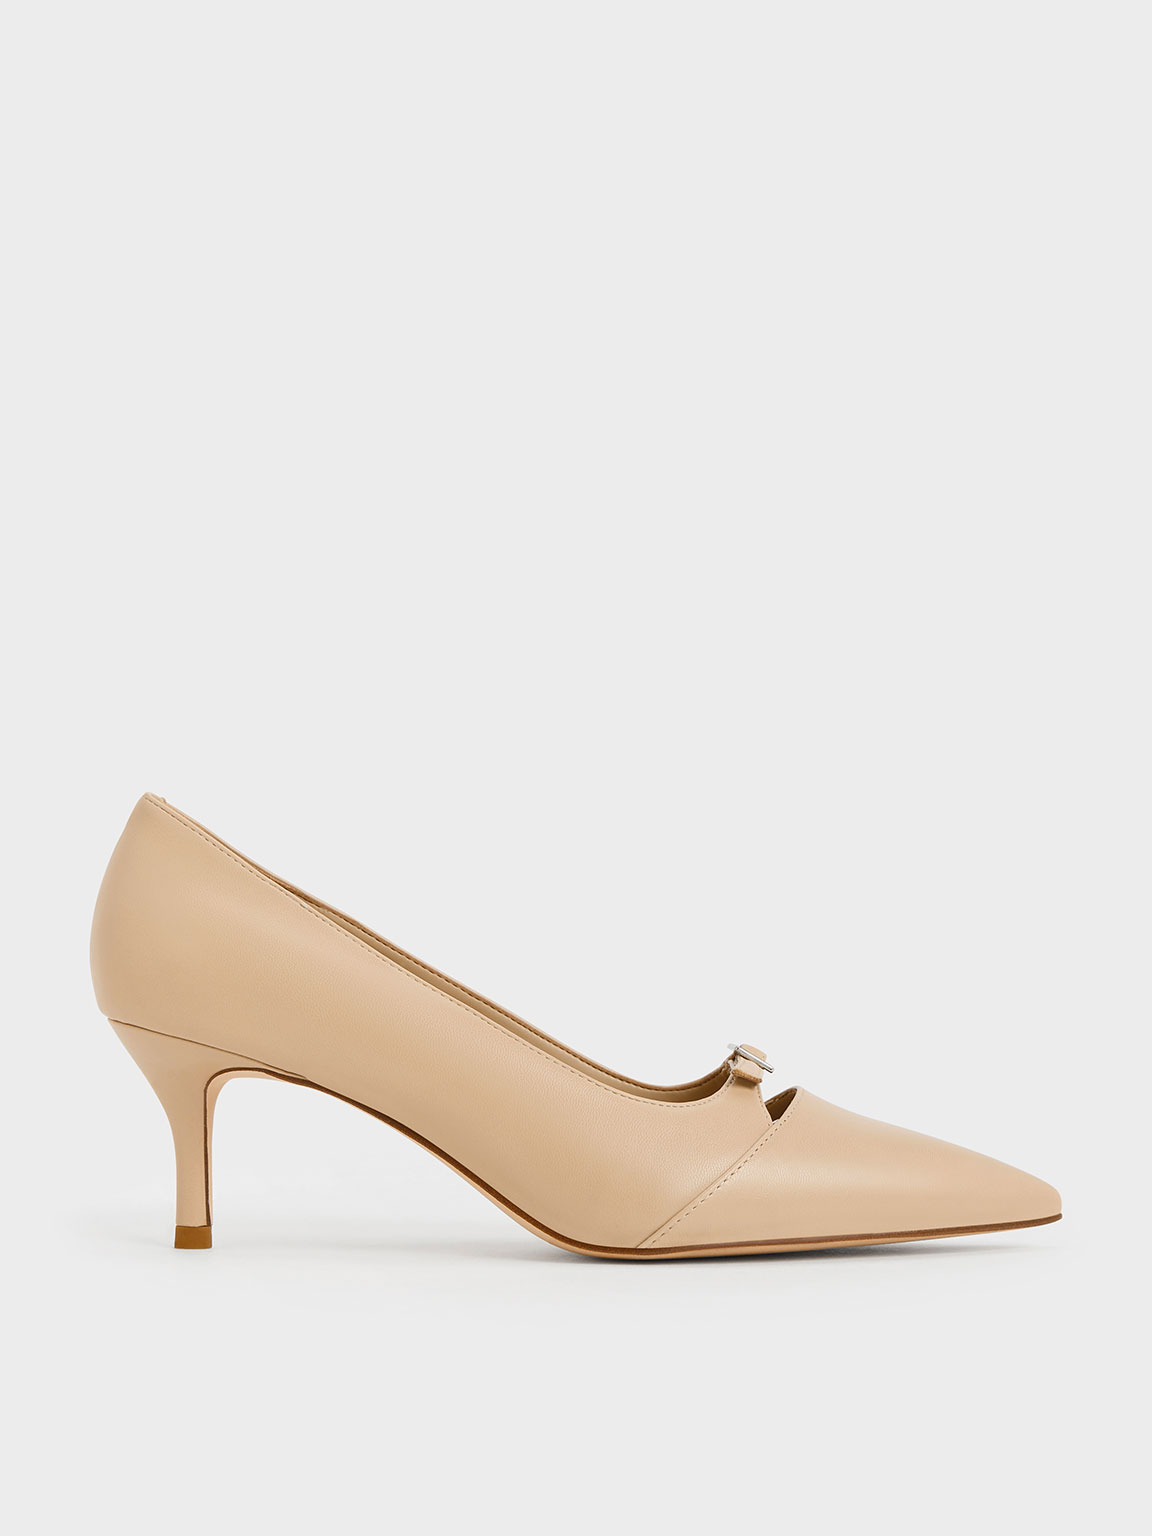 Buckle-Strap Pointed-Toe Pumps